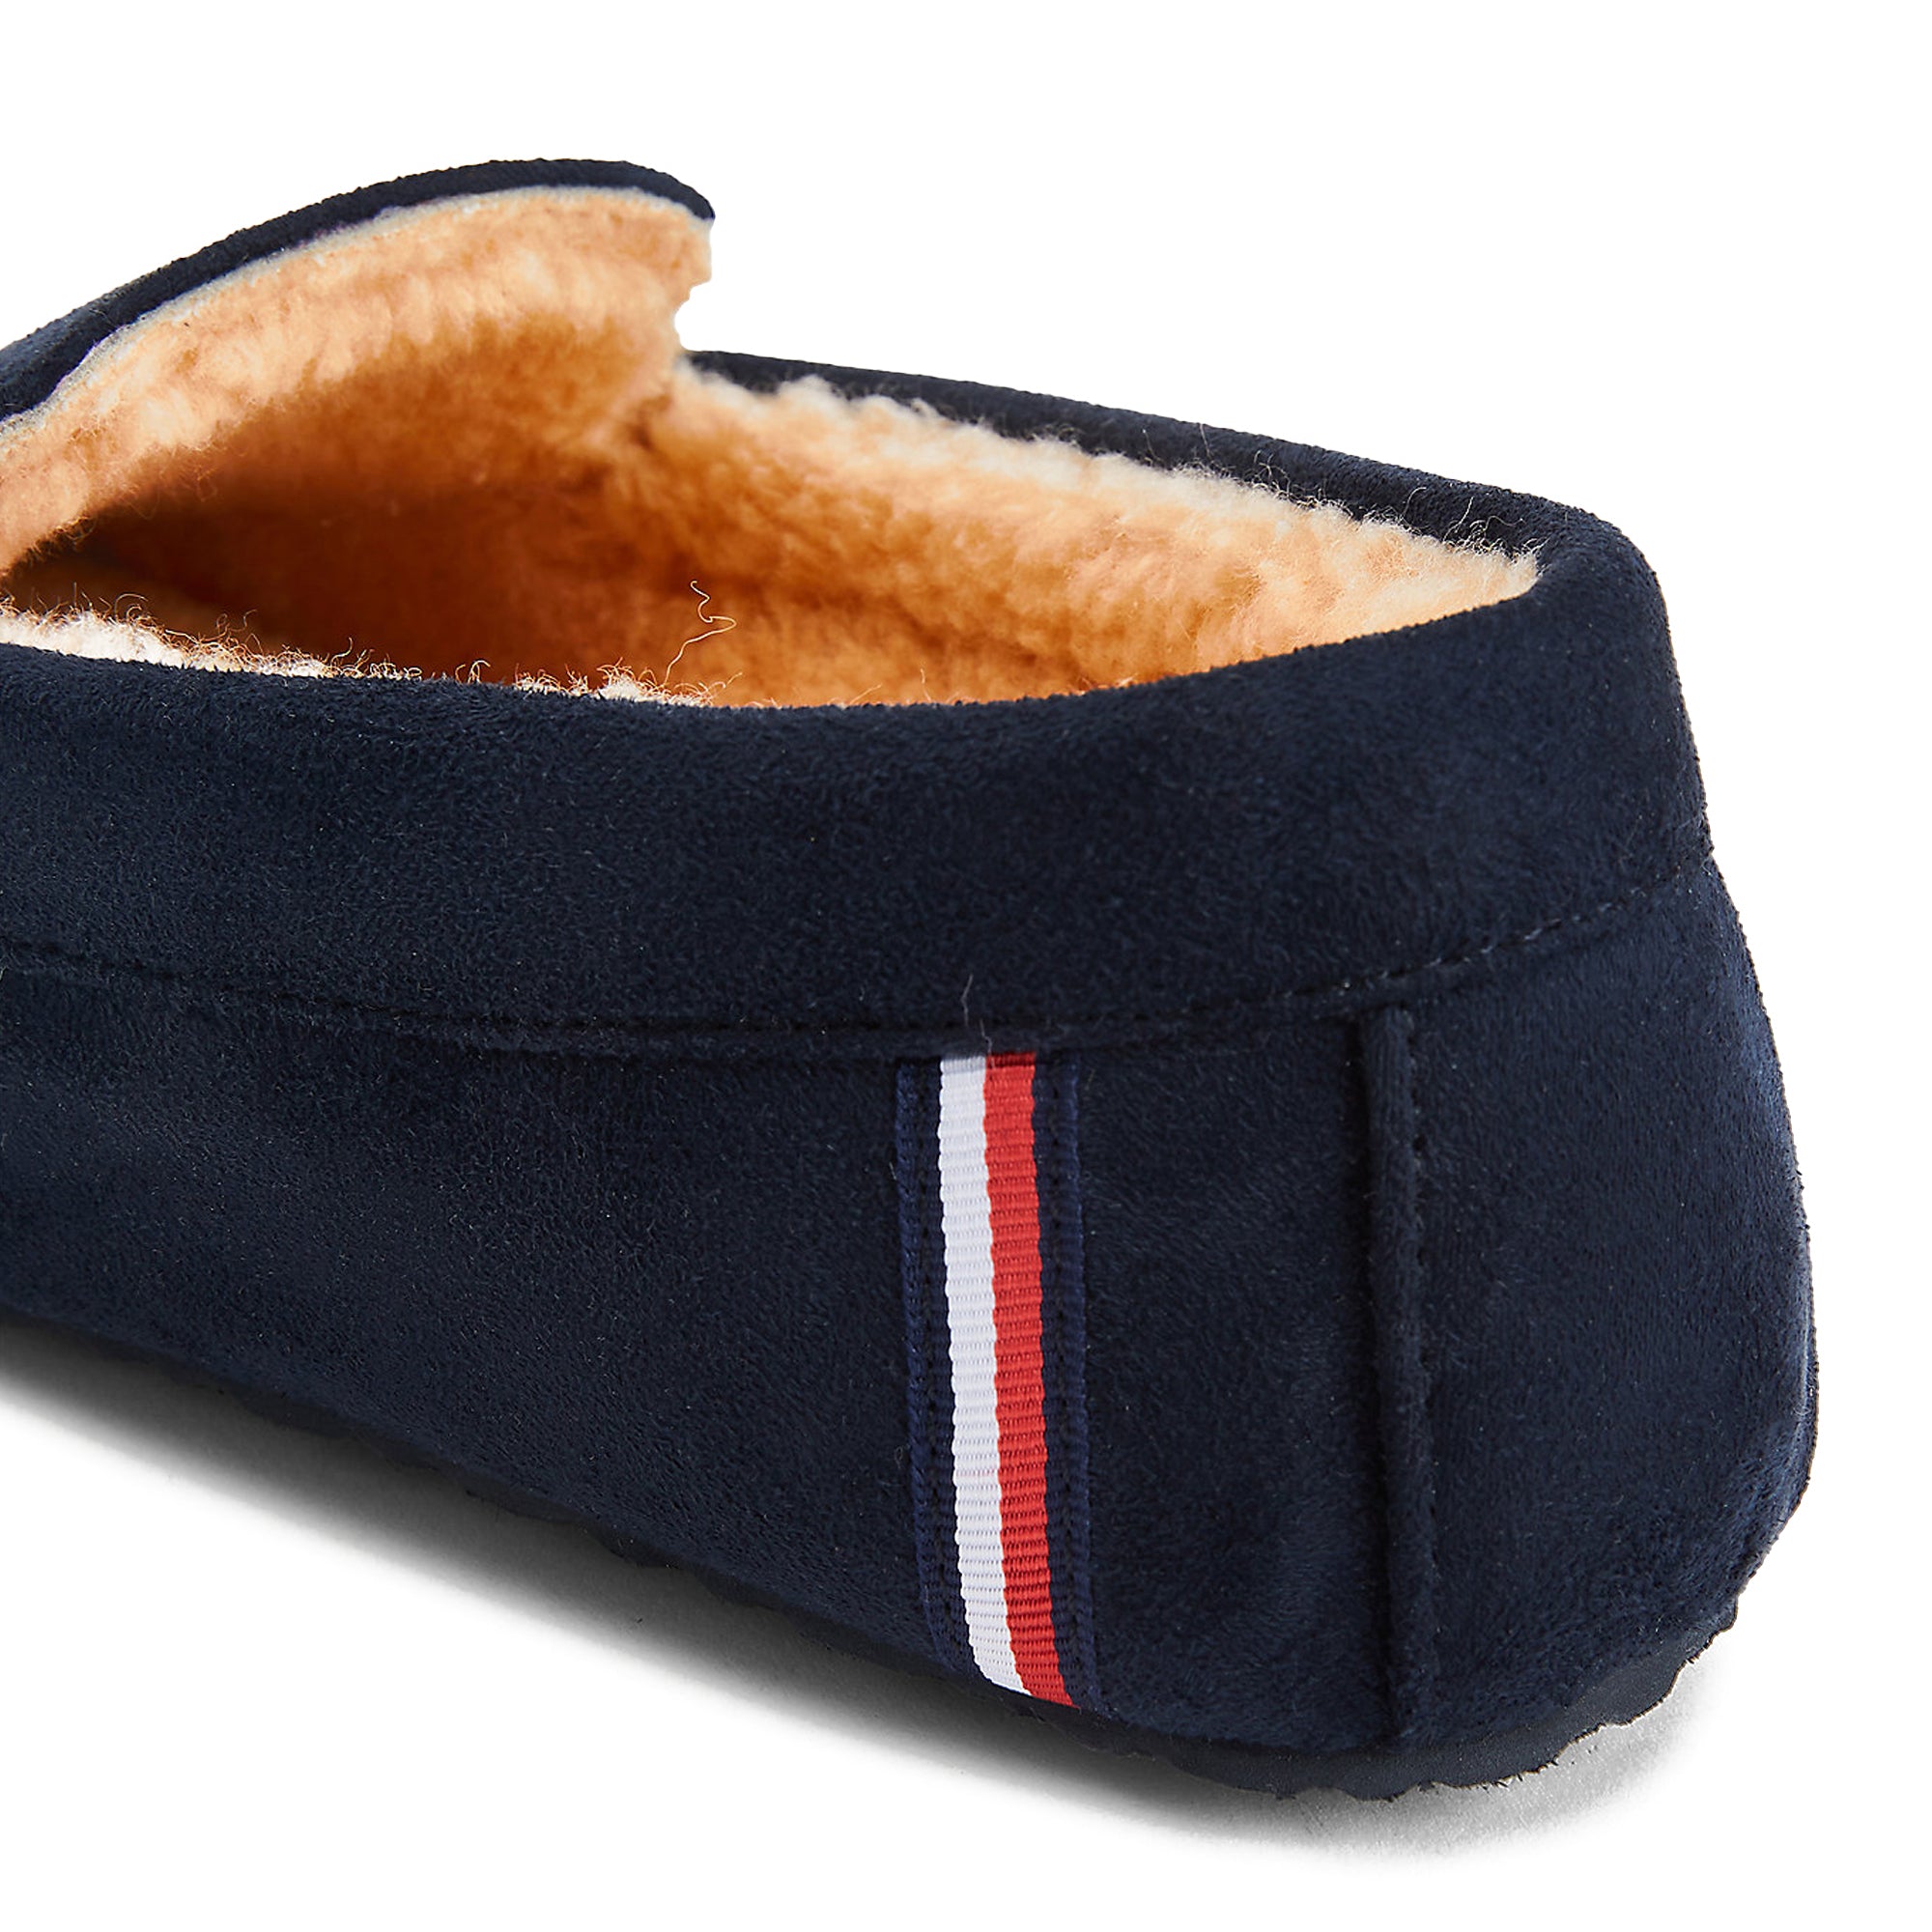 Tommy Hilfiger Warm Corporate Elevated Slippers - Desert Sky